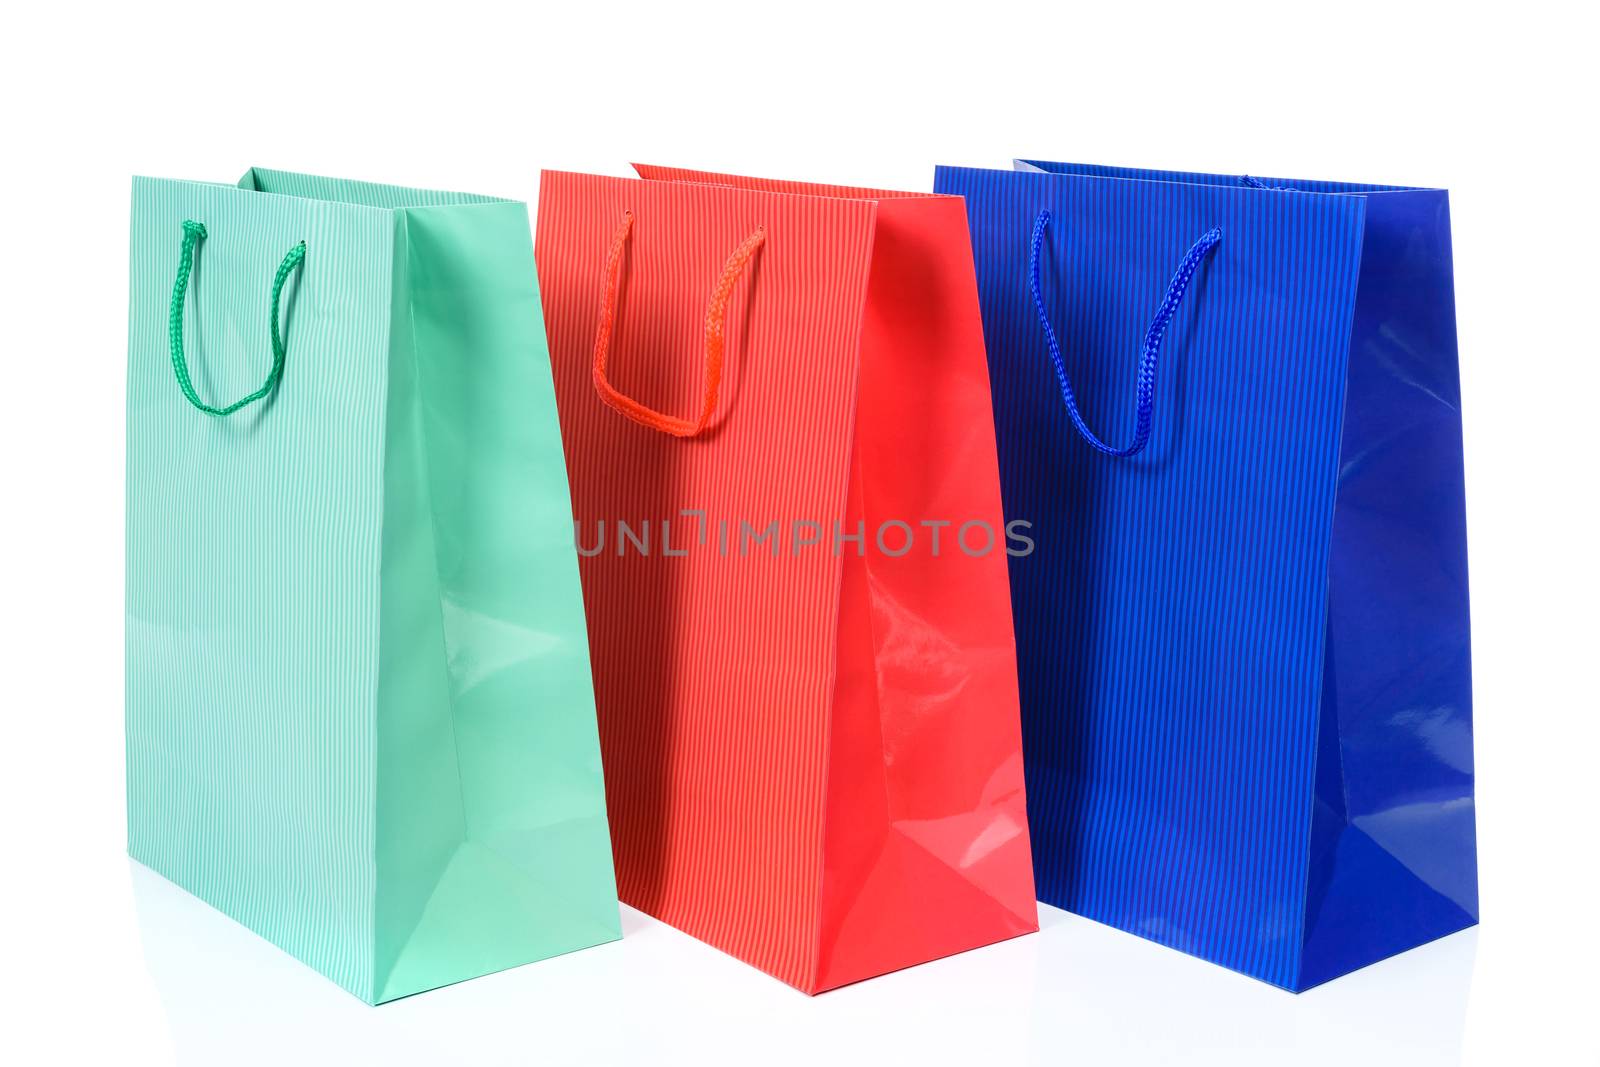 Three shopping bags in different colors in close up and isolated on a white background.